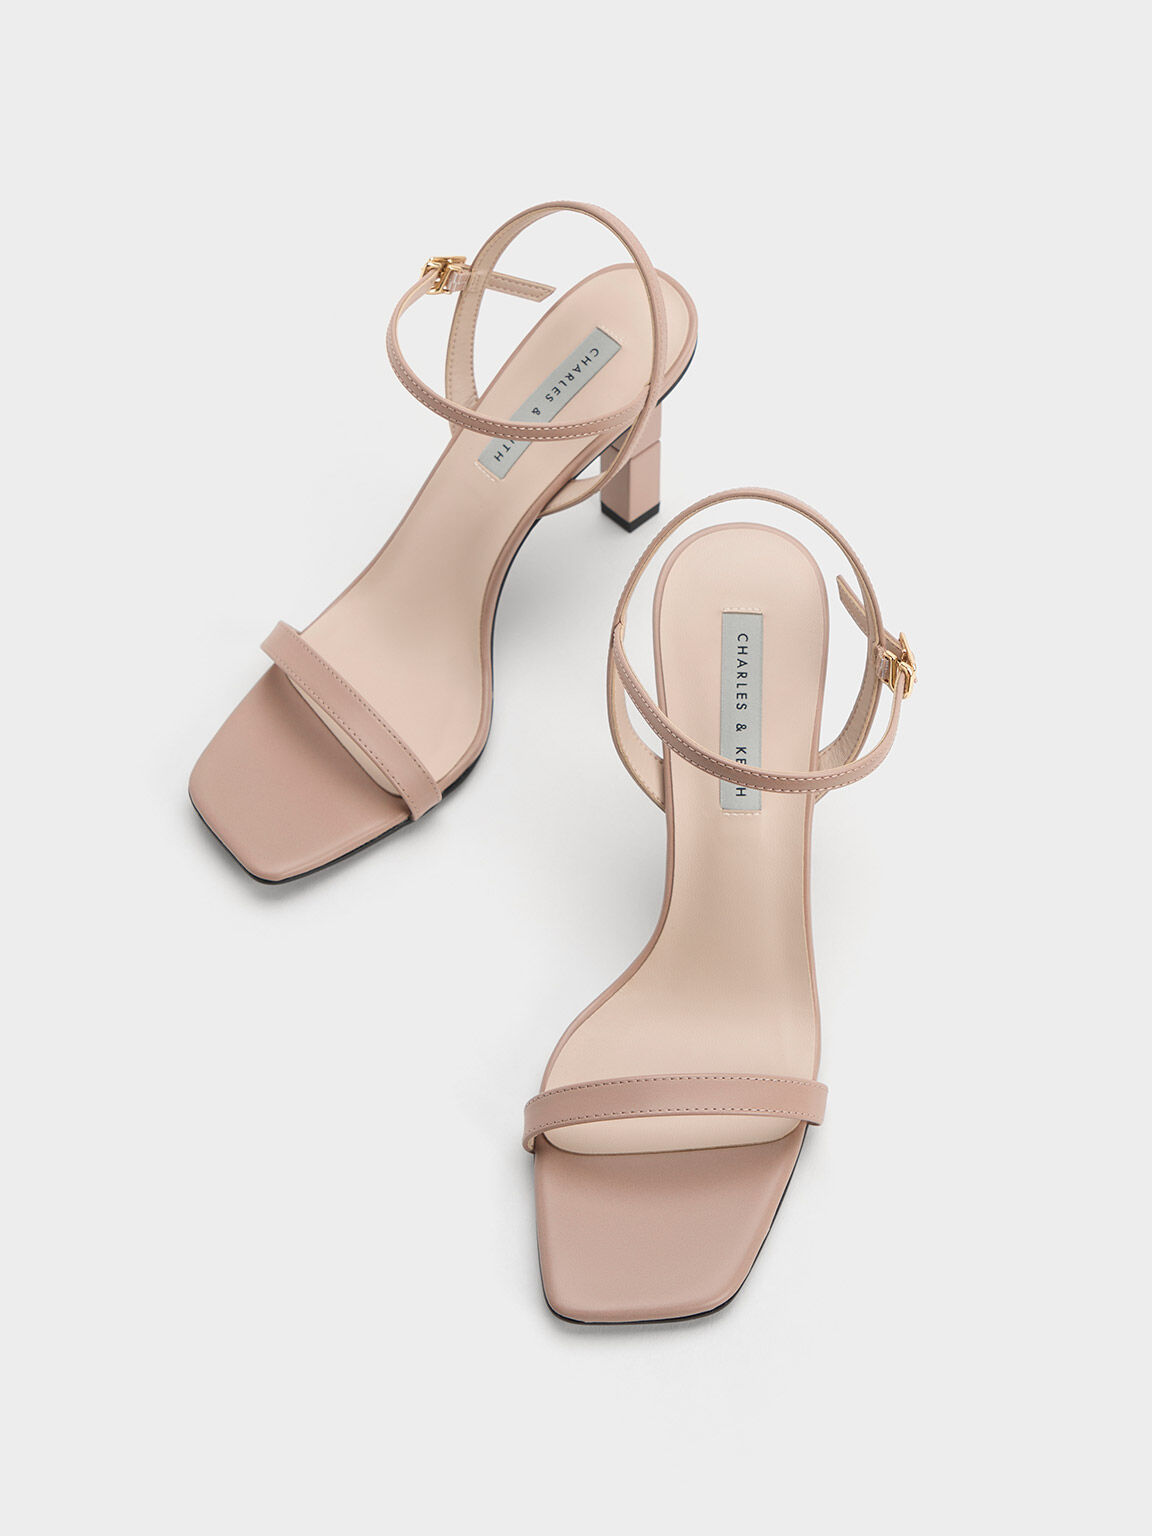 Women's Shoes | Shop Exclusive Styles | CHARLES & KEITH US